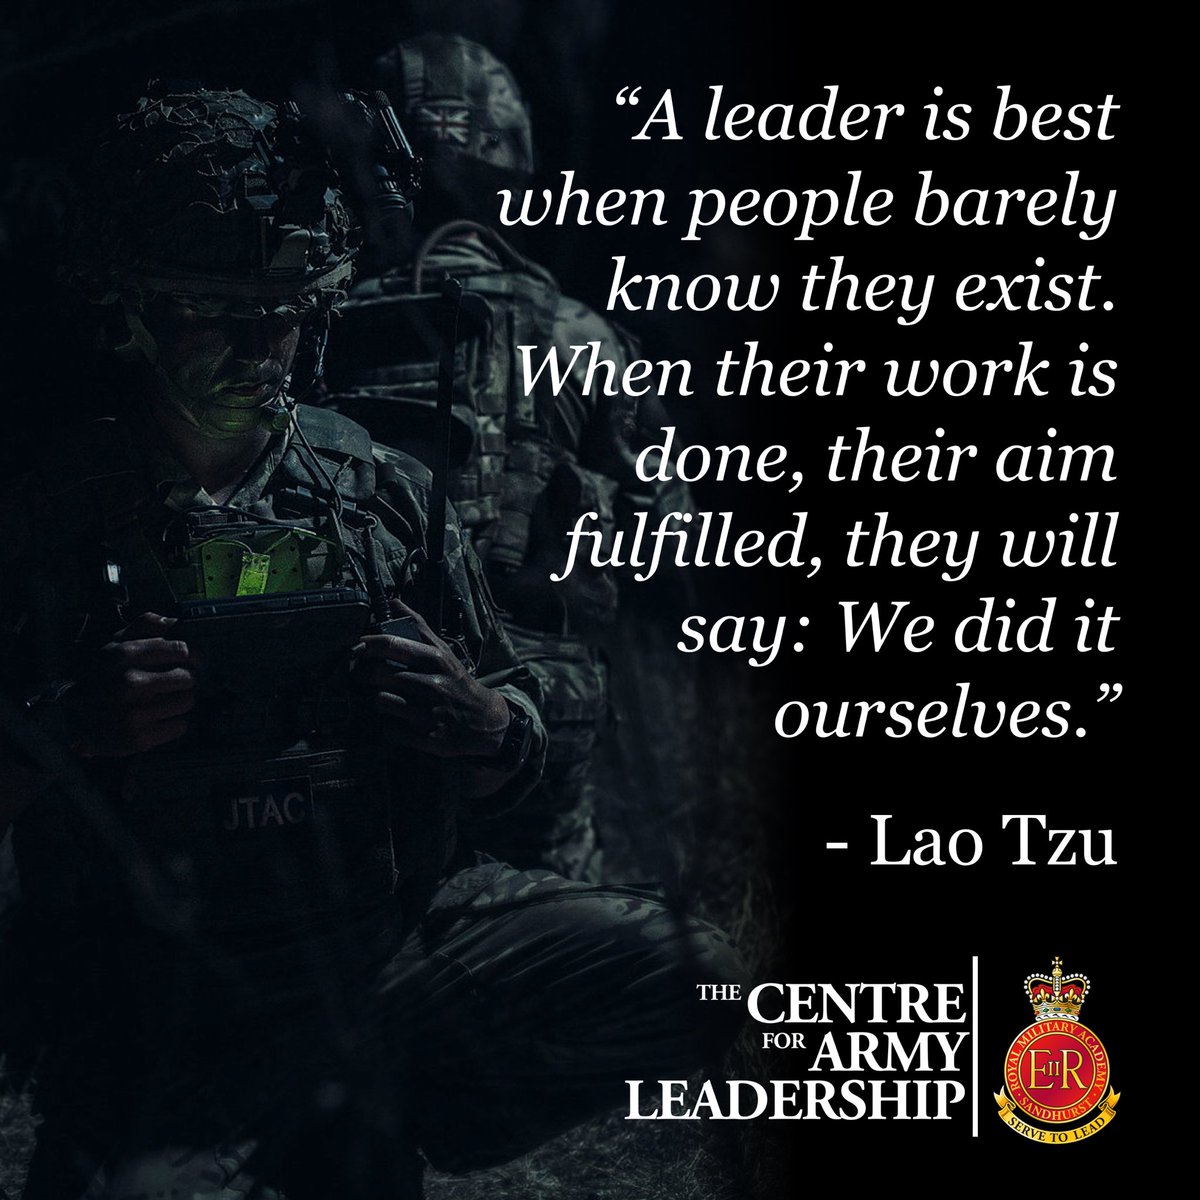 Do teams work for great leaders or do leaders work to make their teams great? “A leaders is best when people barely know they exist. When their work is done, their aim fulfilled, they will say: we did it ourselves.” - Lao Tau #ArmyLeadership #LeaderDevelopment #motivationmonday